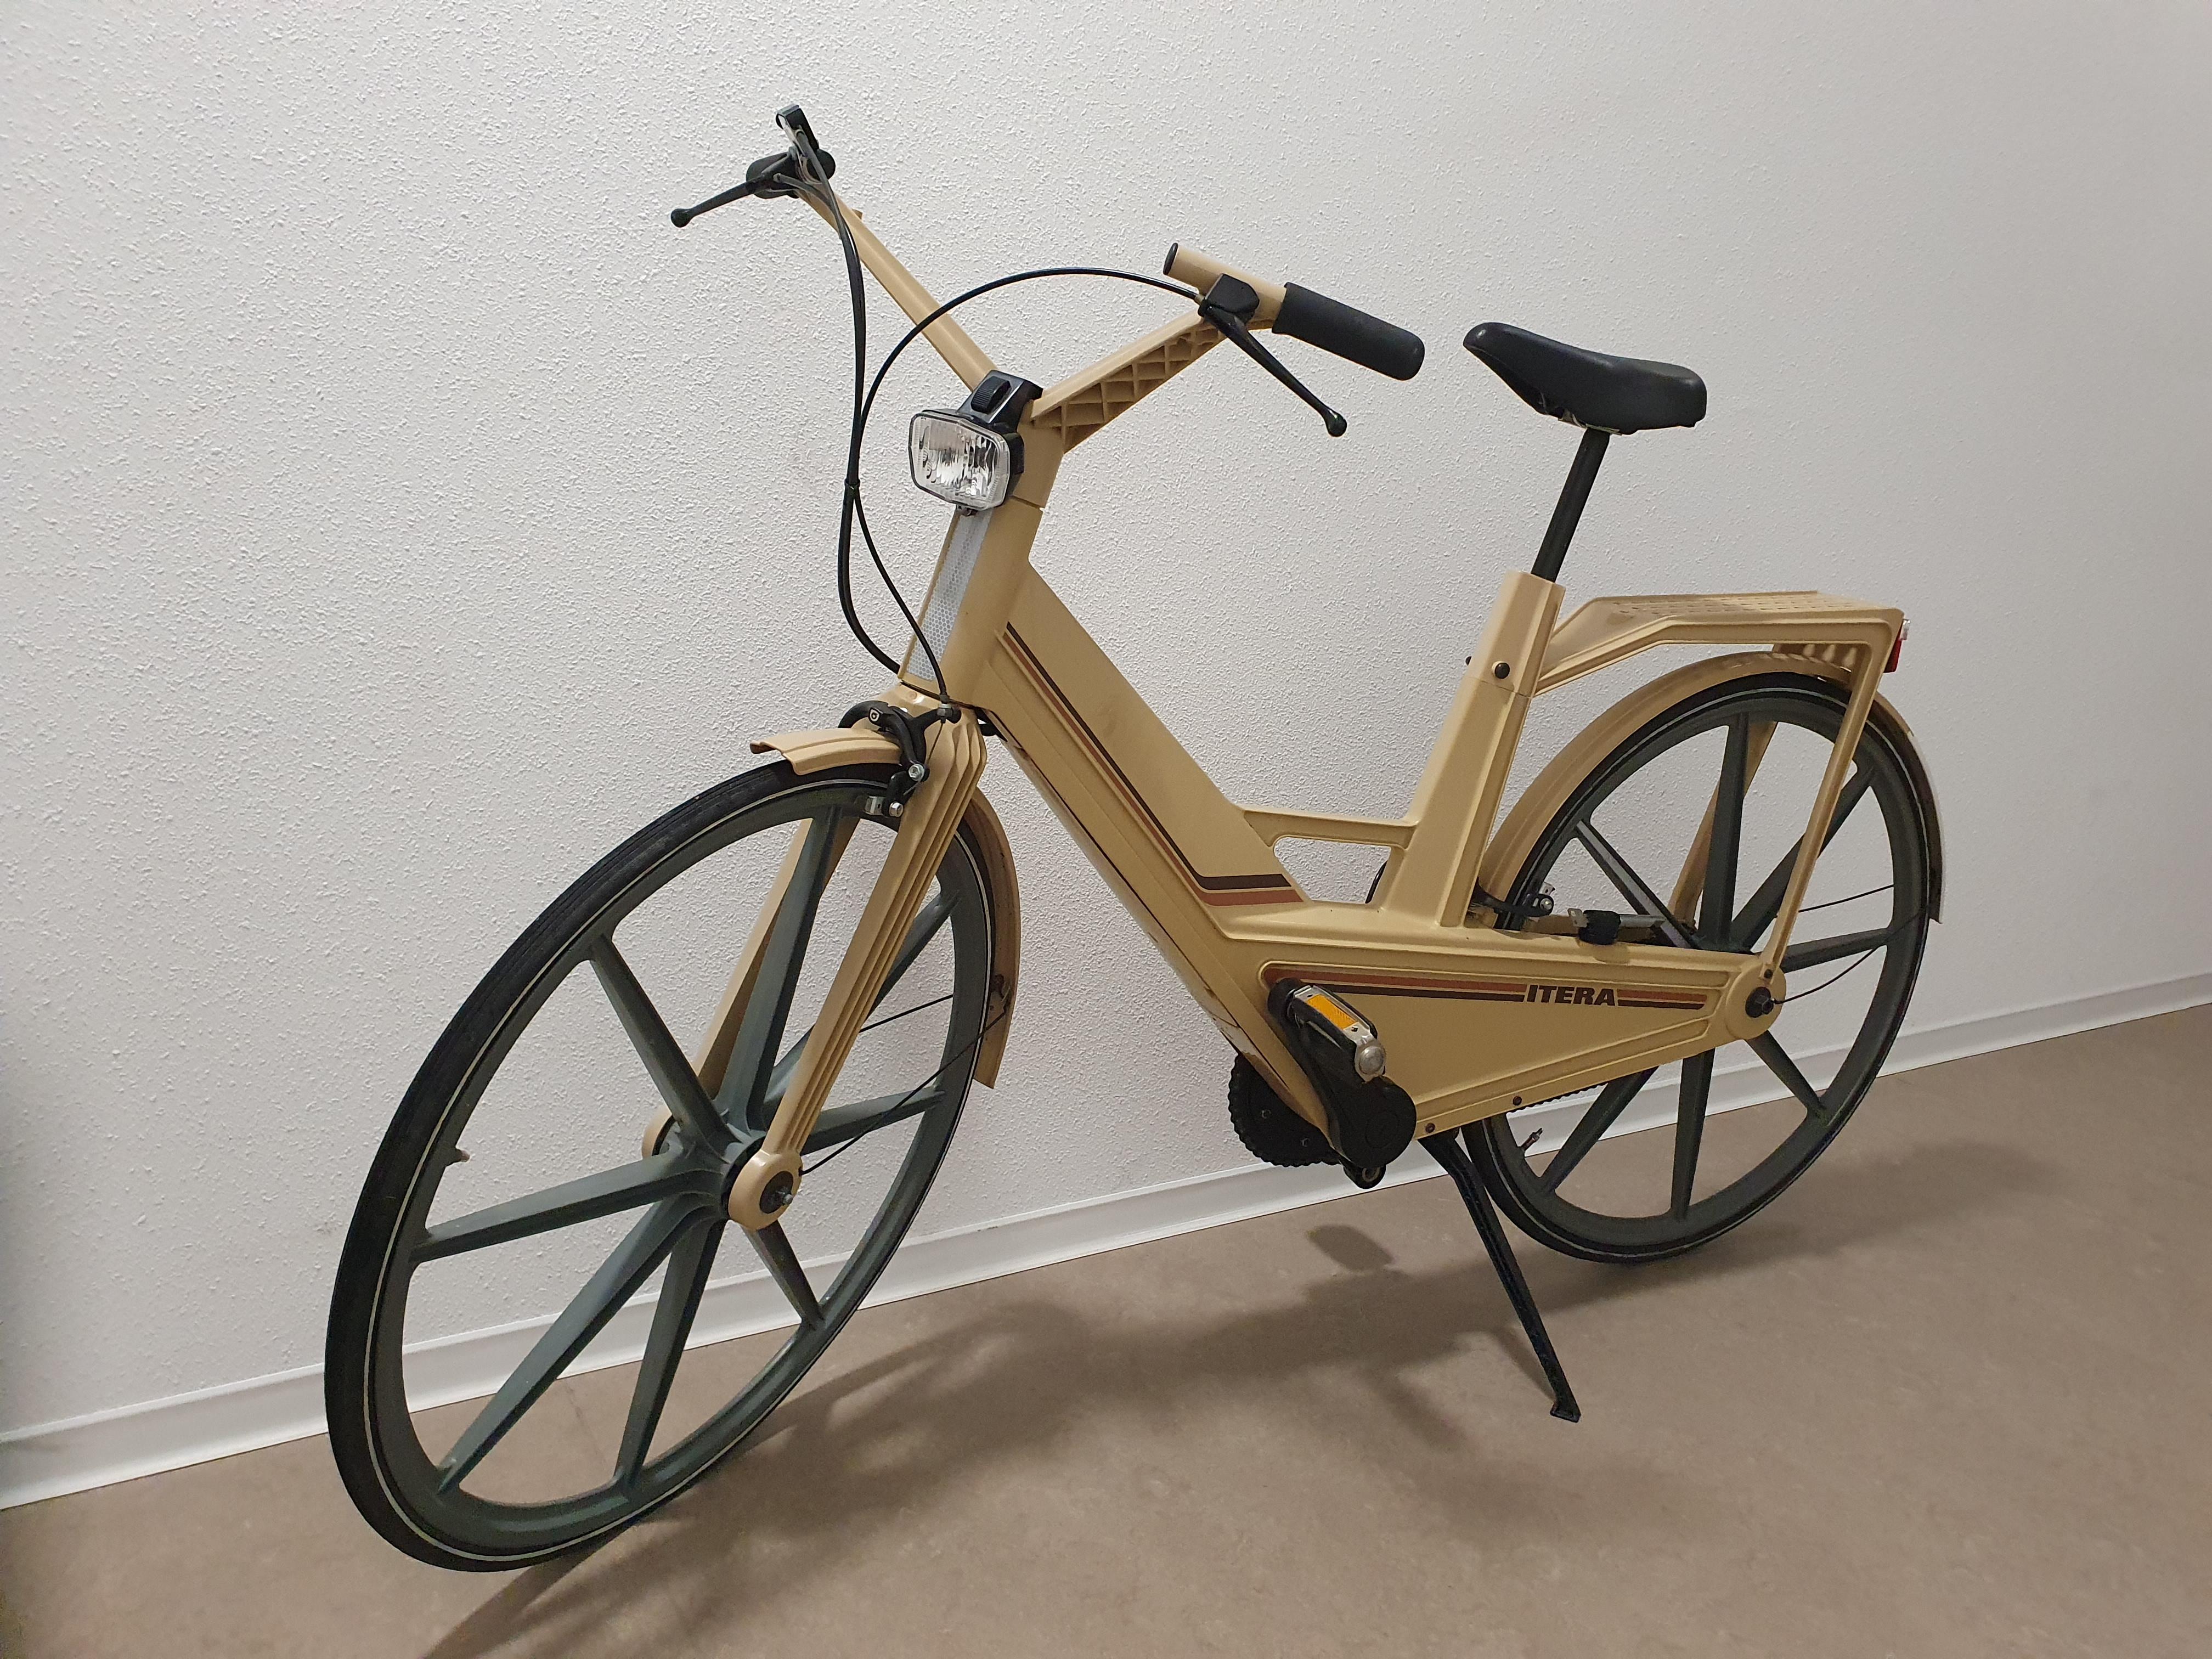 Rare Itera plastic bike, 1981.
The Itera bike was in production from 1982 -1985.
Manufactured by Volvo, Sweden.
30.000 examples were made.
100 pieces were imported to the Netherlands and only a few were sold.
It was not a great success, the plastic